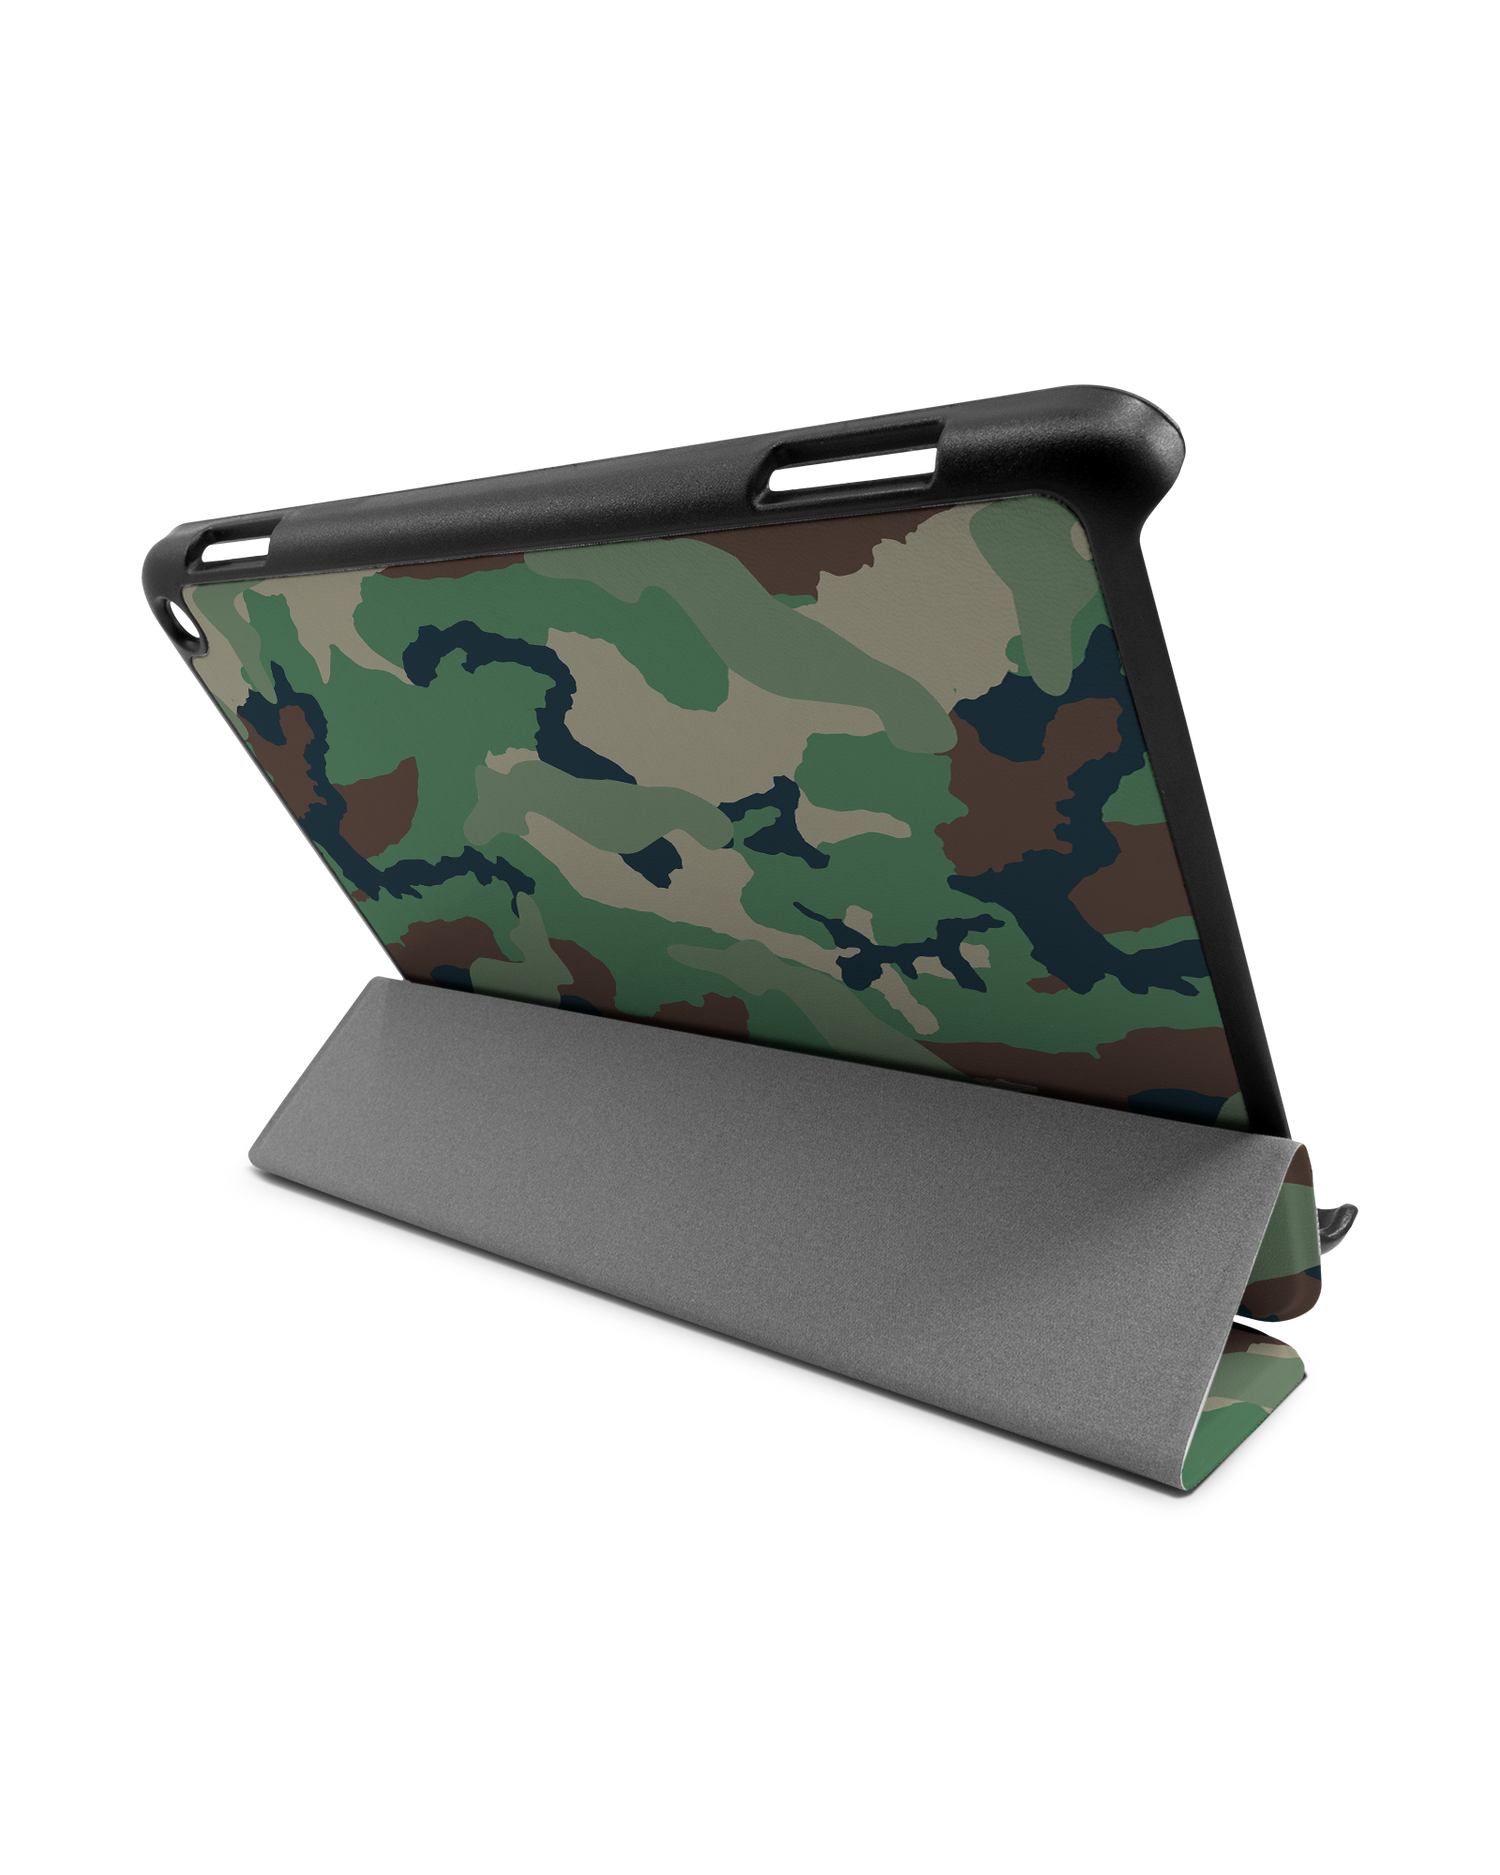 Green and Brown Camo Tablet Smart Case for Amazon Fire HD 8 (2022), Amazon Fire HD 8 Plus (2022), Amazon Fire HD 8 (2020), Amazon Fire HD 8 Plus (2020): Used as Stand